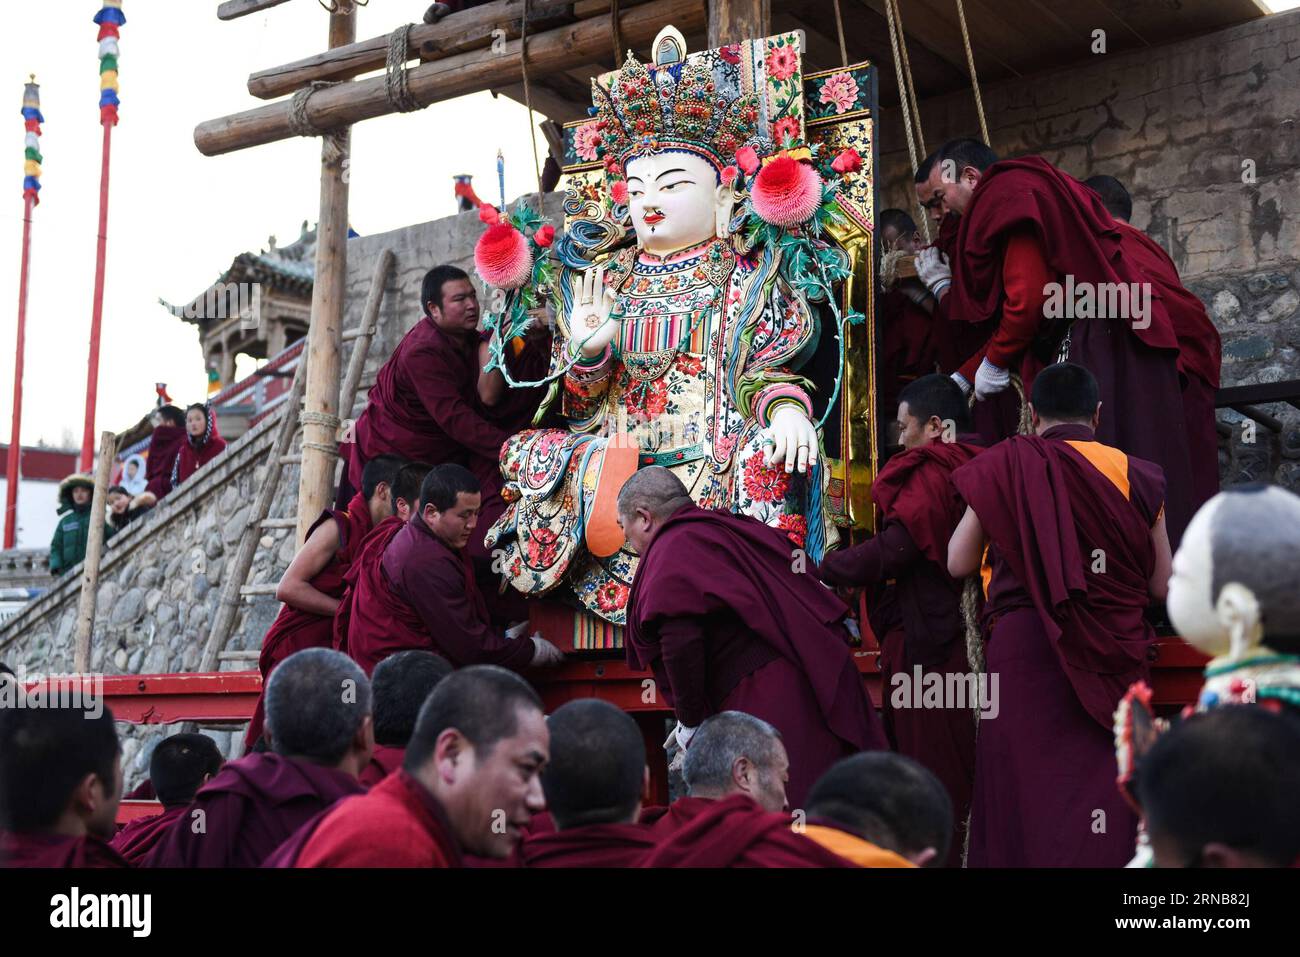 XINING, Feb. 22, 2016 -- Several Buddhists pull butter sculptures to a platform at Taer Monastery in Huangzhong County of northwest China s Qinghai Province, Feb. 22, 2016. An exhibition of butter sculptures was held on Monday at Taer Monastery, which is the birth place of Tsongkhapa, founder of the Geluk school of Tibetan Buddhism. ) (dhf) CHINA-QINGHAI-TAER MONASTERY-BUTTER SCULPTURE (CN) WuxGang PUBLICATIONxNOTxINxCHN   Xining Feb 22 2016 several Buddhists pull Butter Sculptures to a Platform AT Taer monastery in Huang Zhong County of Northwest China S Qinghai Province Feb 22 2016 to Exhibi Stock Photo